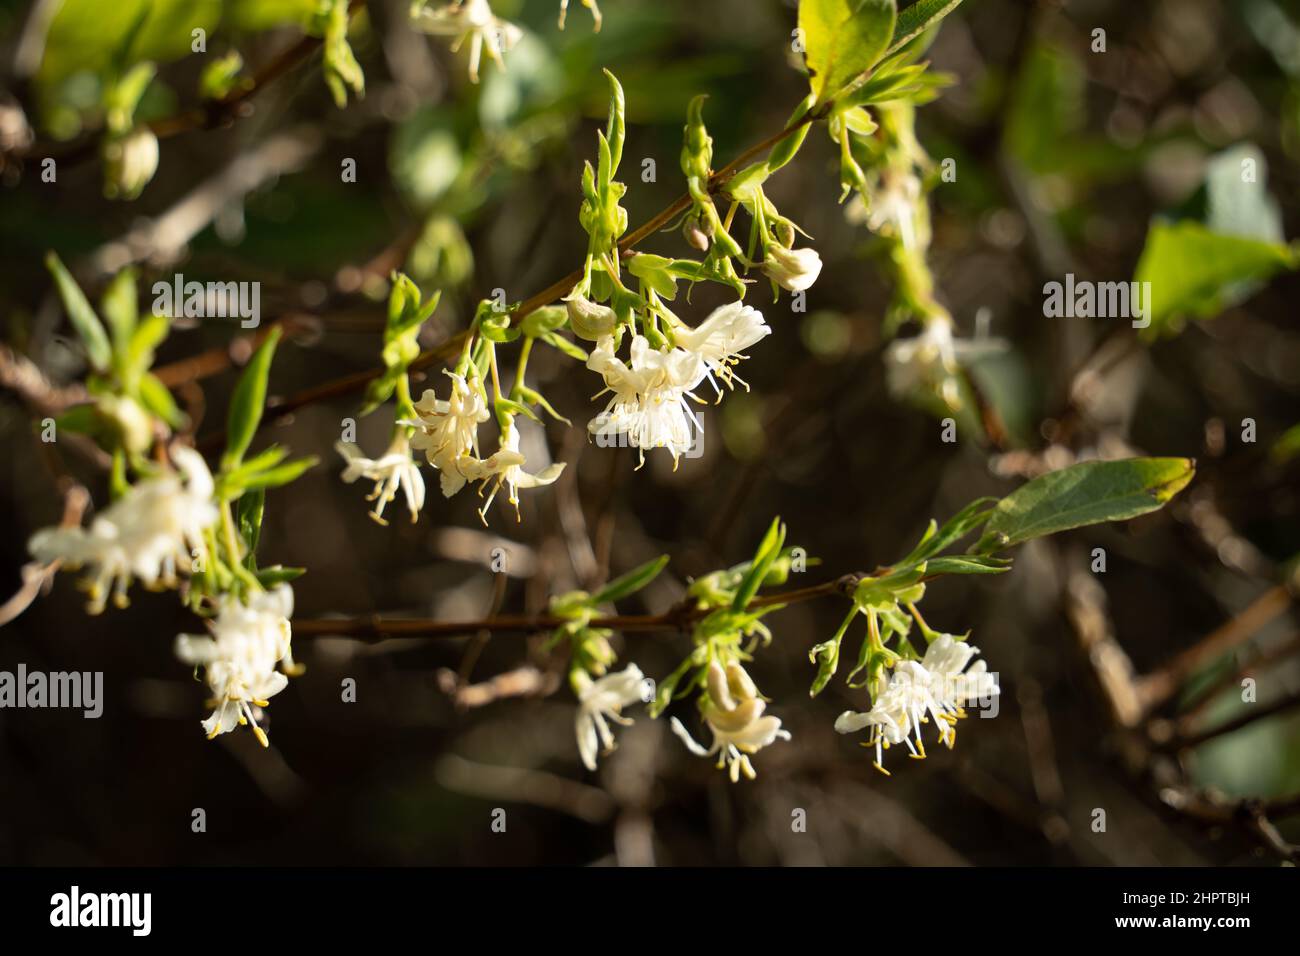 Winter honeysuckle, Lonicera fragrantissima, growing in a public park in the UK. Stock Photo